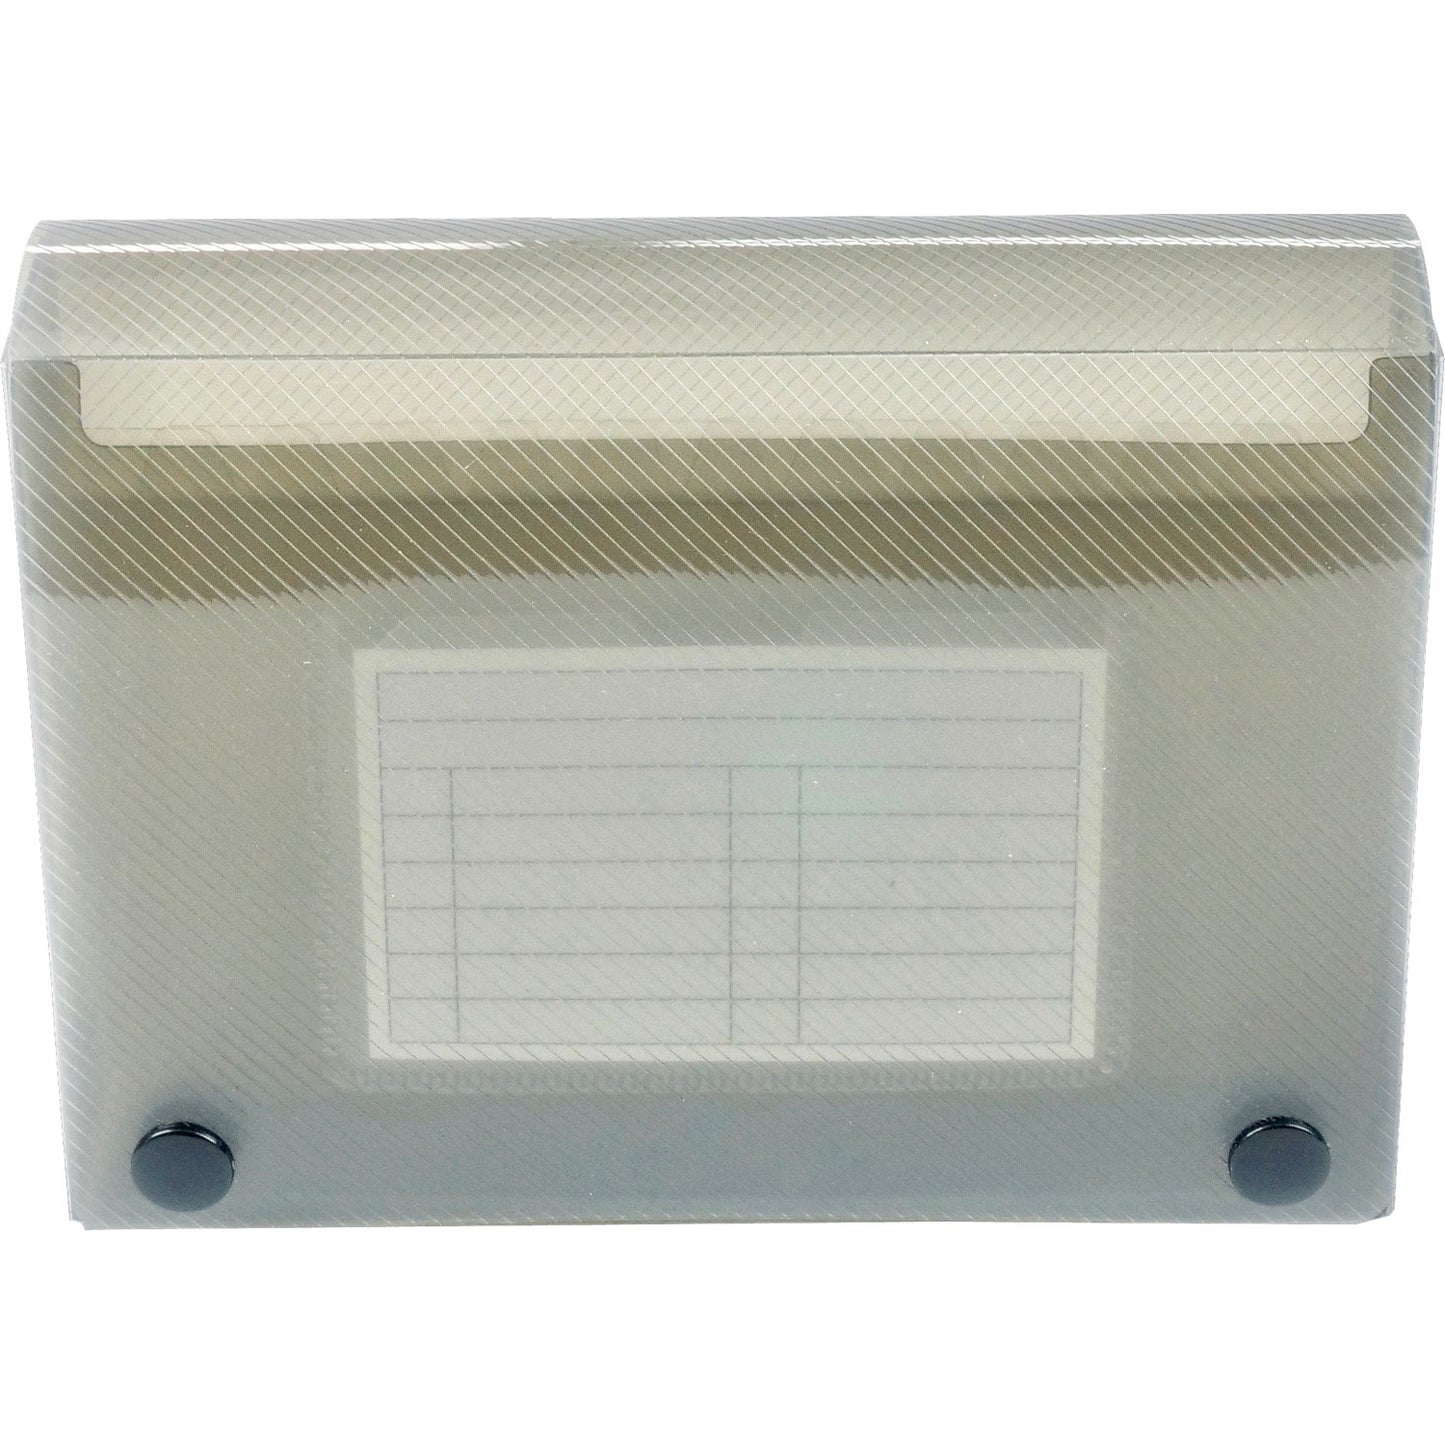 Index Card Holder 6x4 with Dividers - EL806